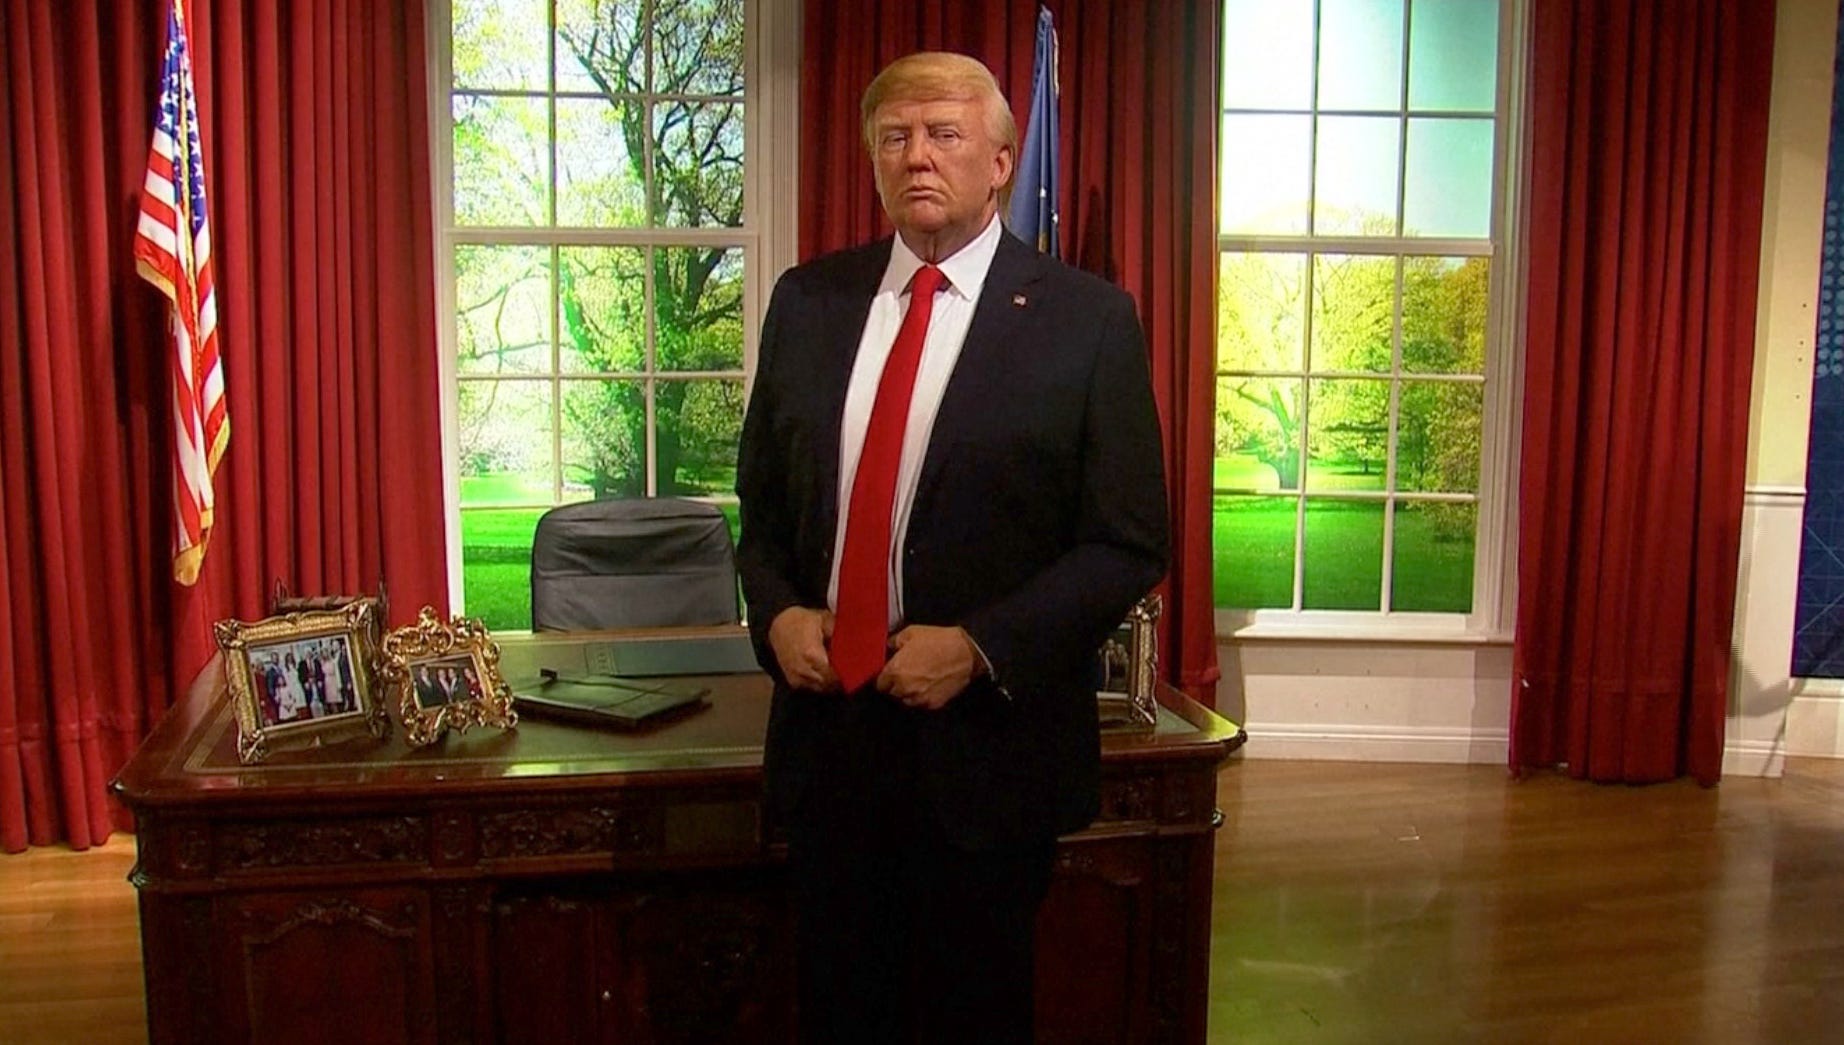 Trump wax figure pulled from Texas display after visitors attacked it –  reports, Donald Trump